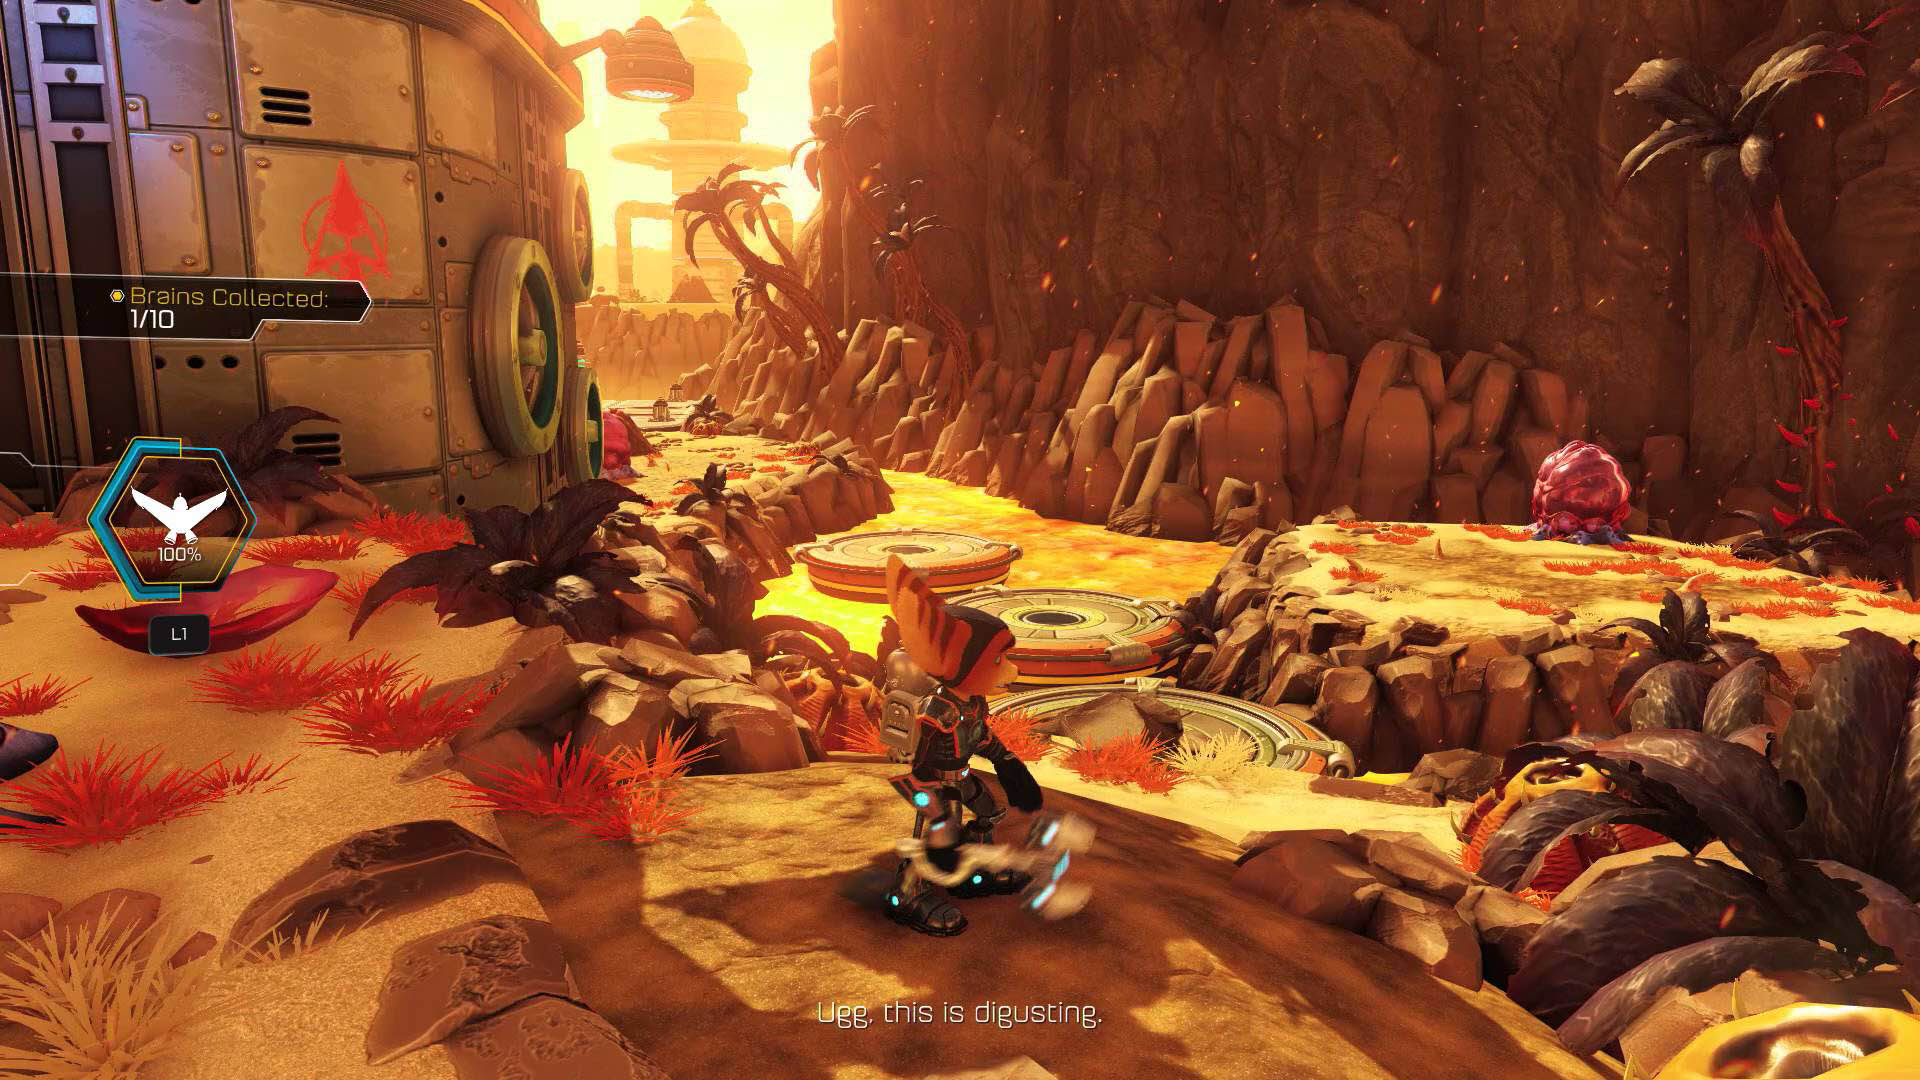 Ratchet and Clank Remaster